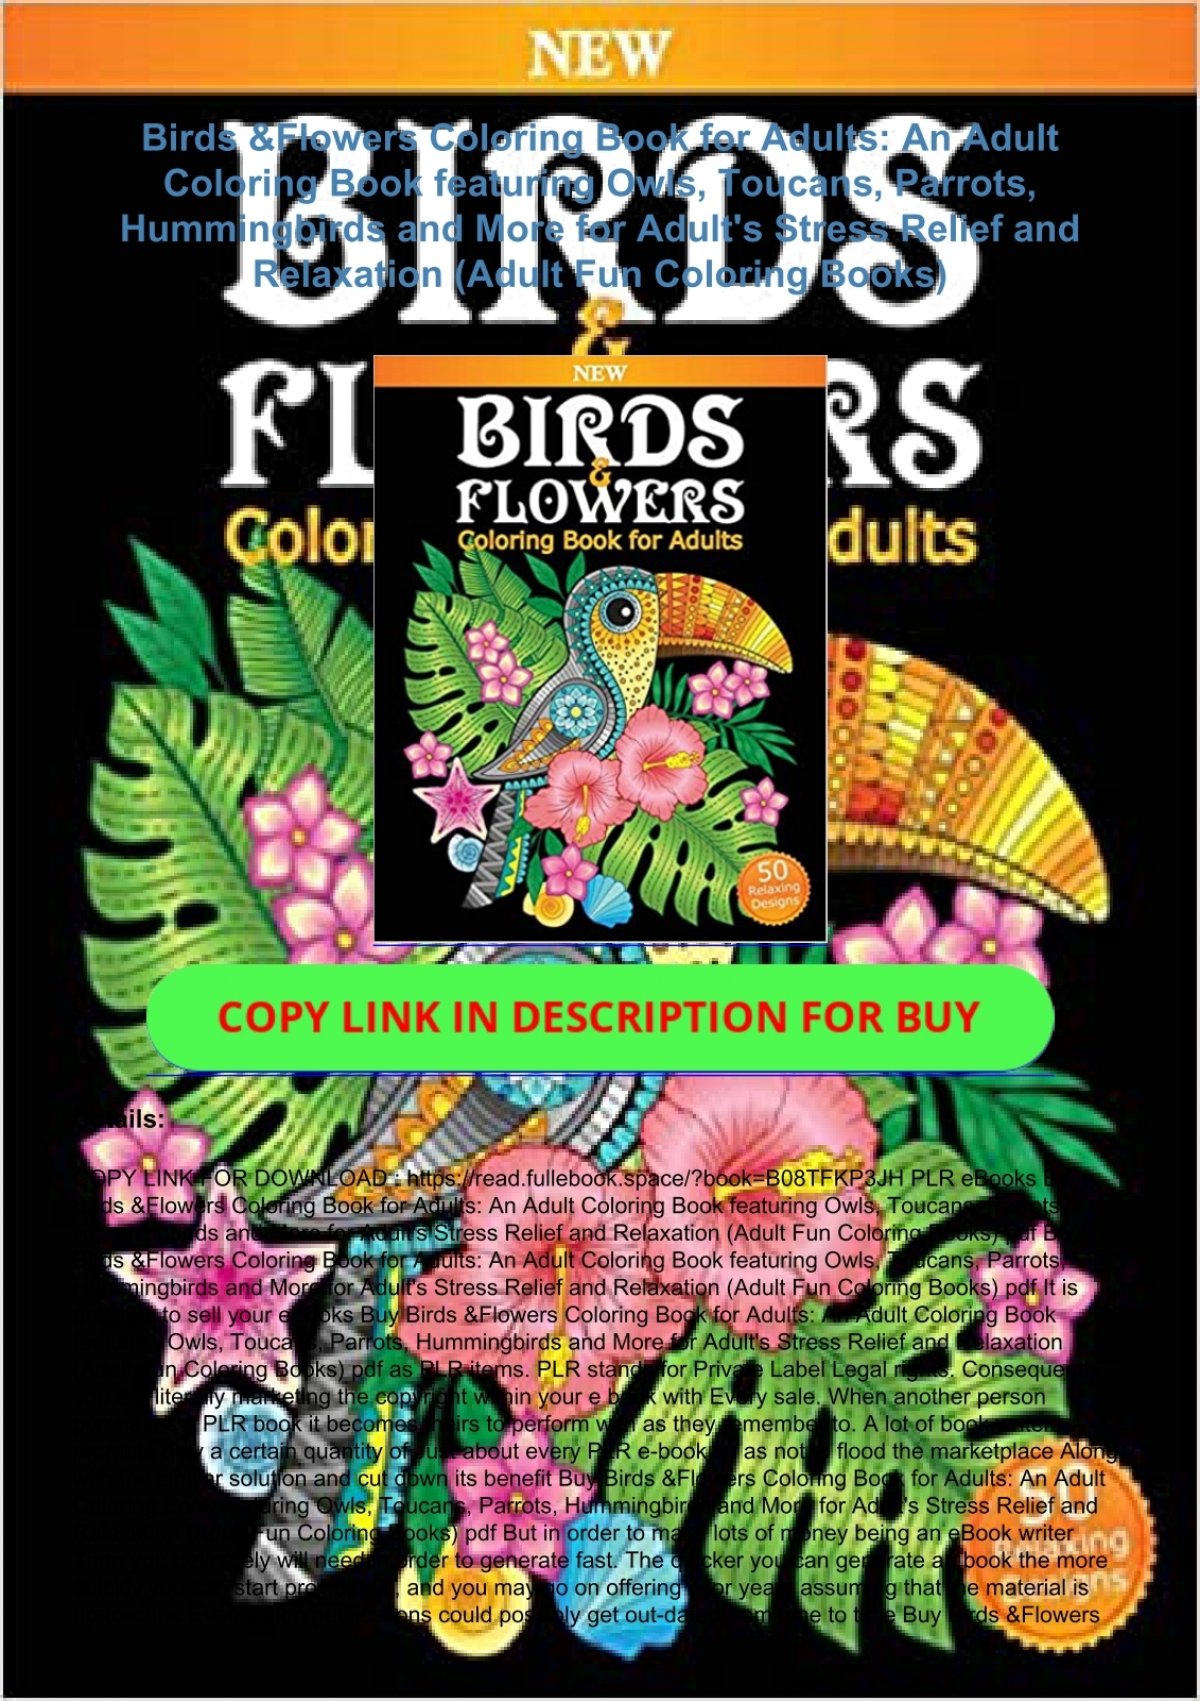 Download Download Pdf Birds Flowers Coloring Book For Adults An Adult Coloring Book Featuring Owls Toucans Parrots Hummingbirds And More For Adult S Stress Relief And Relaxation Adult Fun Coloring Books